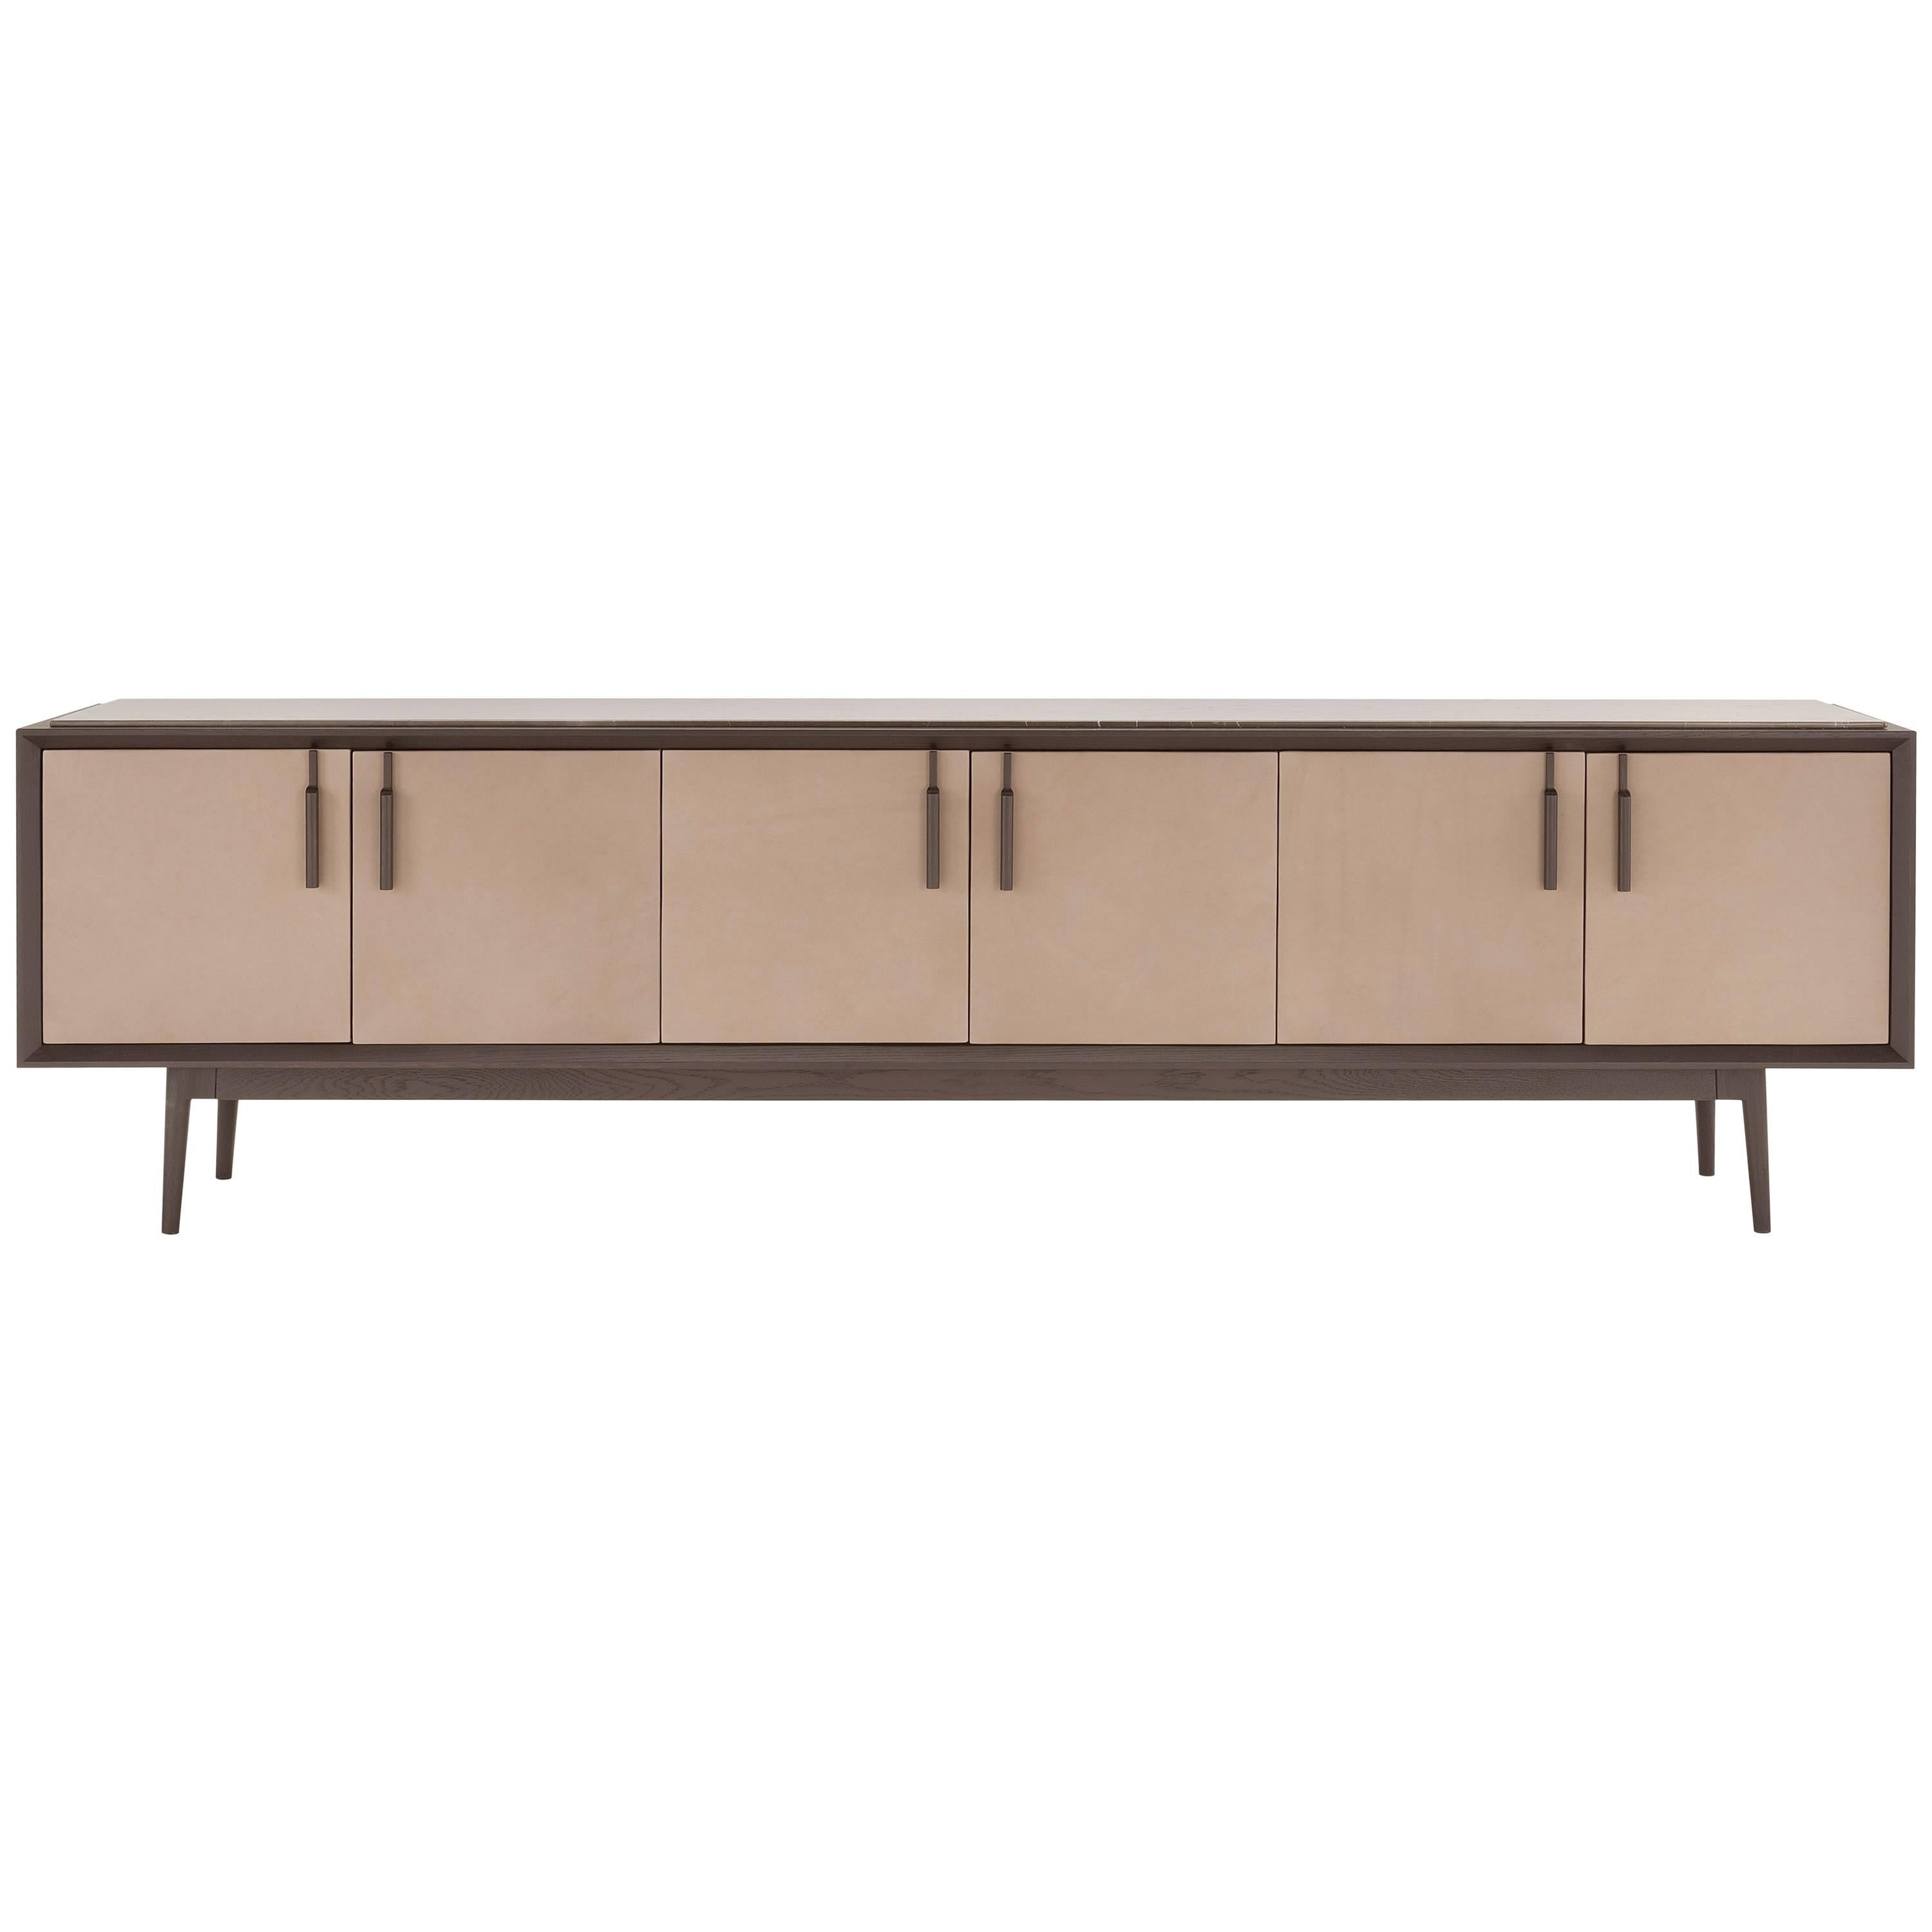 Amura 'Theo' Sideboard by Maurizio Marconato & Terry Zappa For Sale